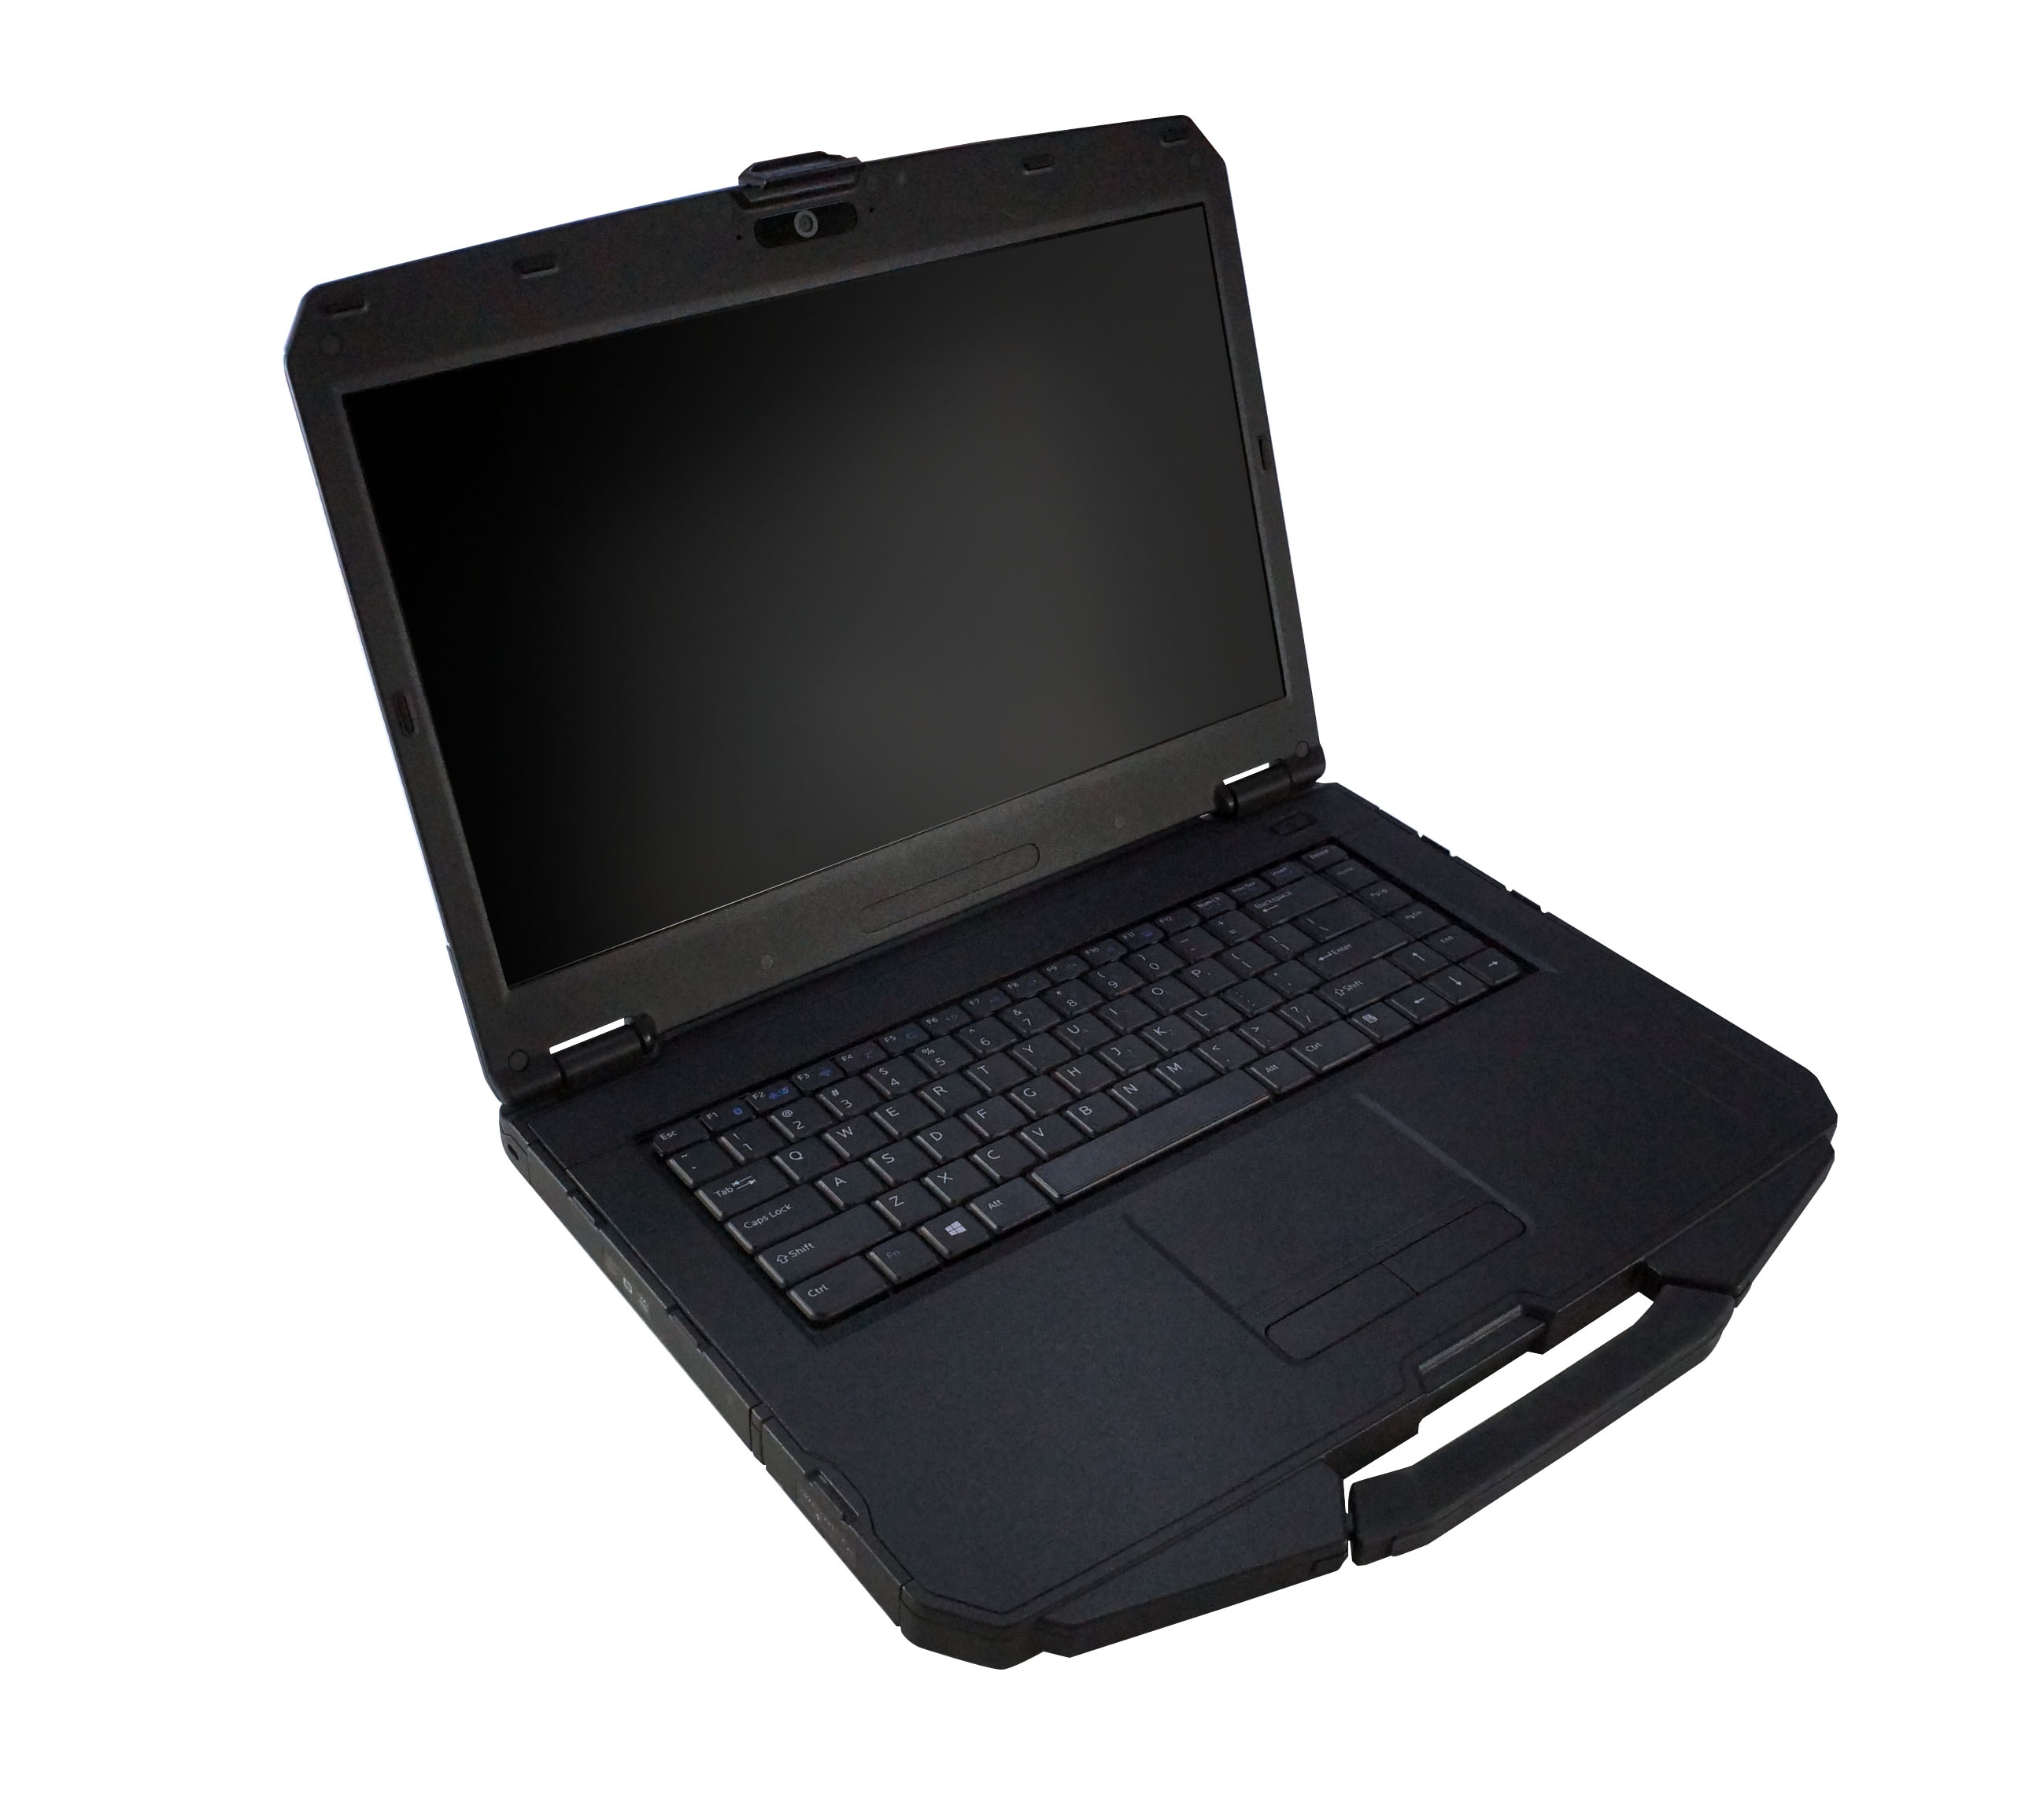 Durabook S15AB Rugged Laptop Review - NotebookCheck.net Reviews